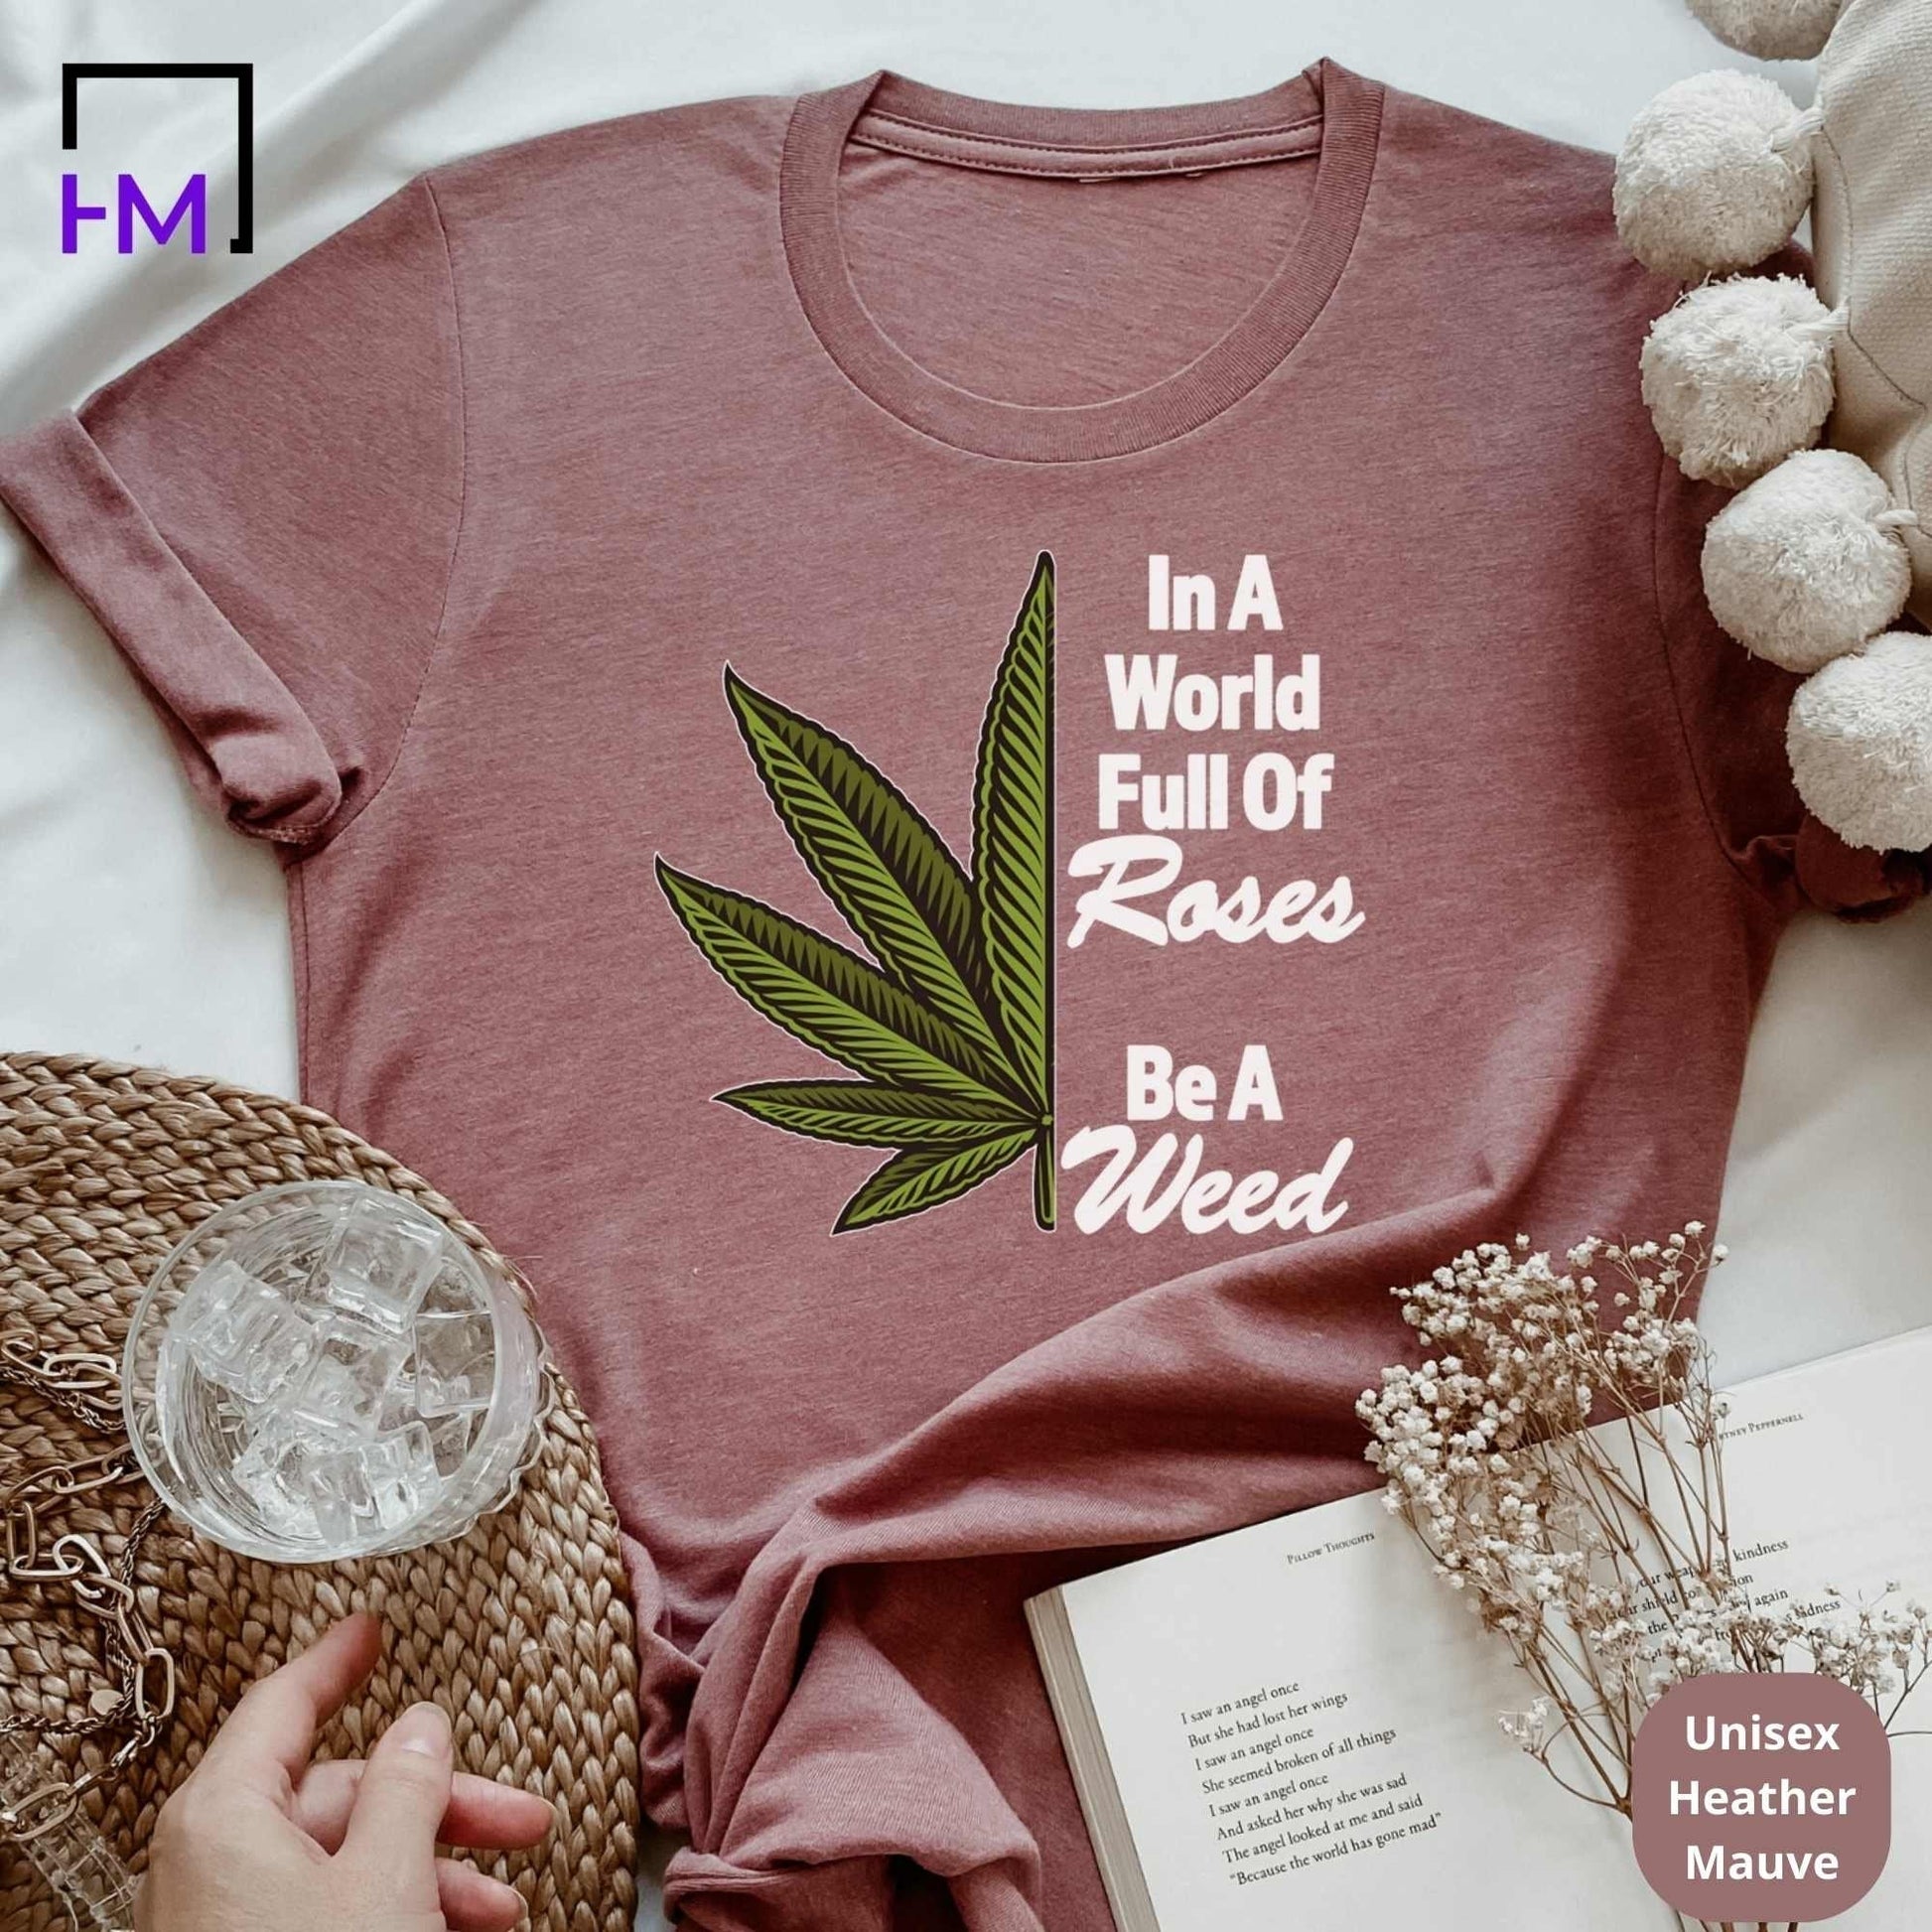 Stoner Gifts, Weed T Shirt, Stoner Girl Tee, Marijuana apparel, Cannabis Clothing, Gift for Her, Hippie Accessories, 420 Gift, Mary Jane HMDesignStudioUS